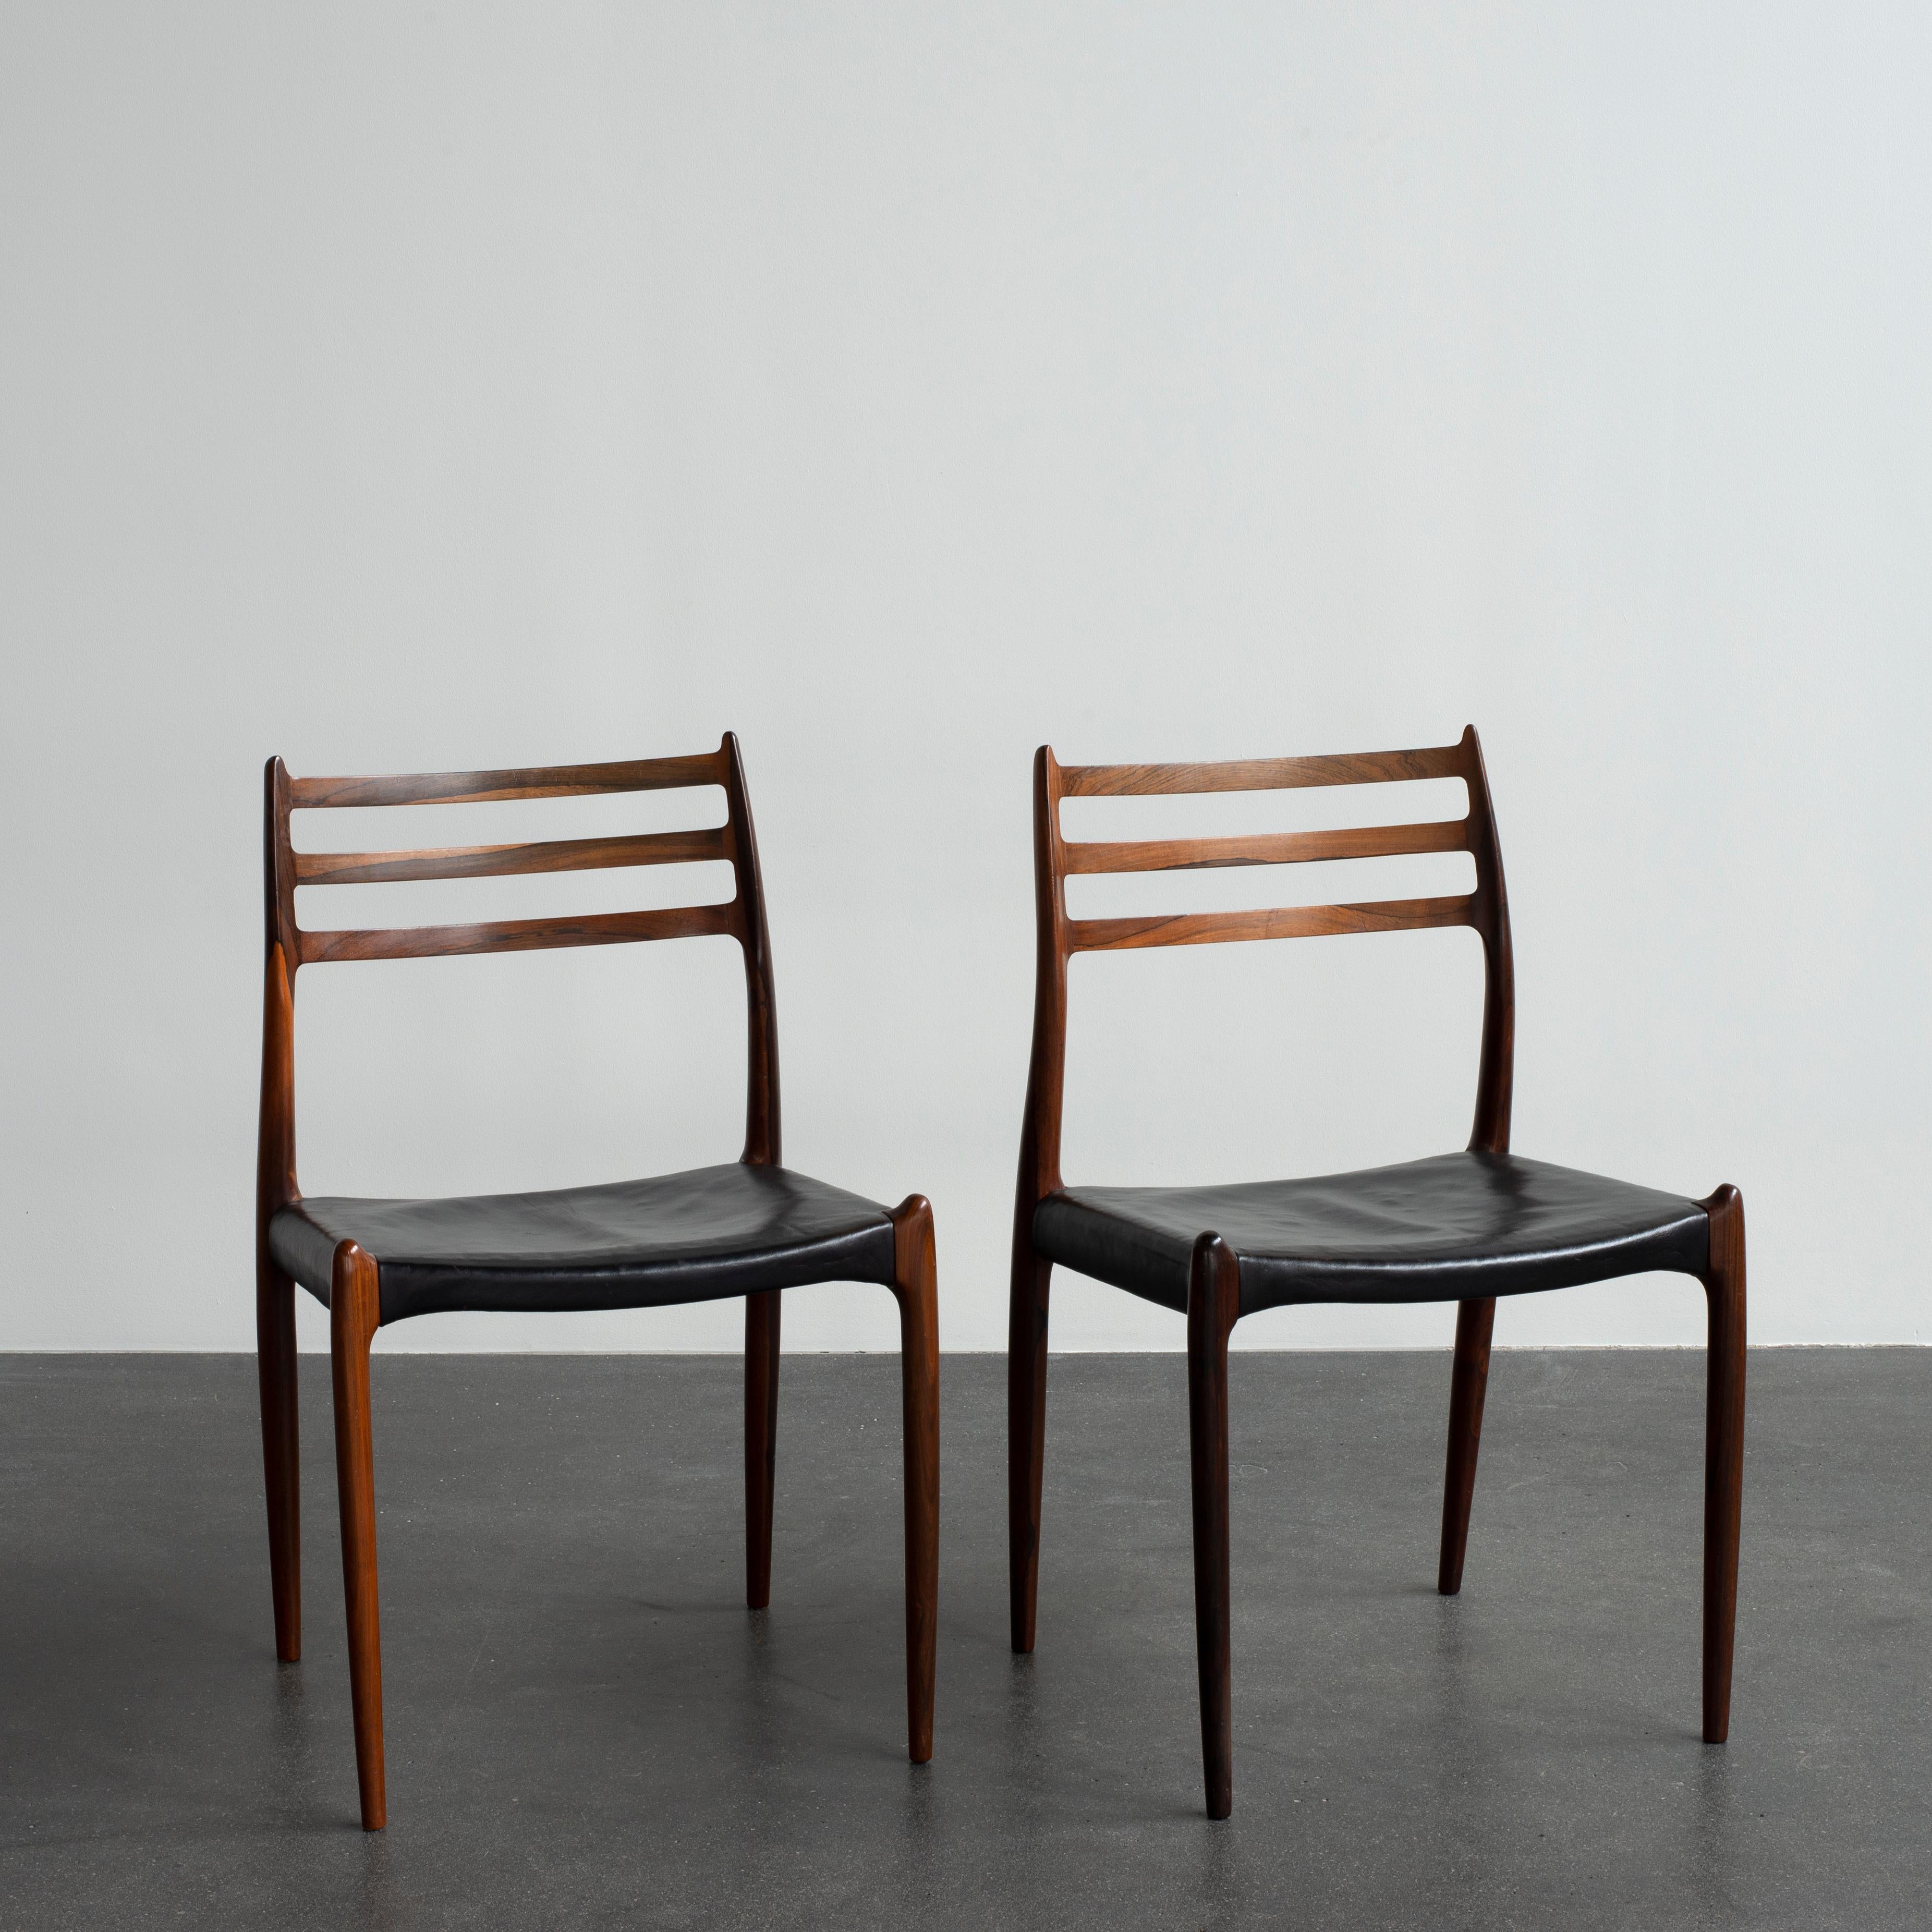 Niels O. Møller pair of rosewood chairs, seats leather. Manufactured by J. L. Møller, Denmark.